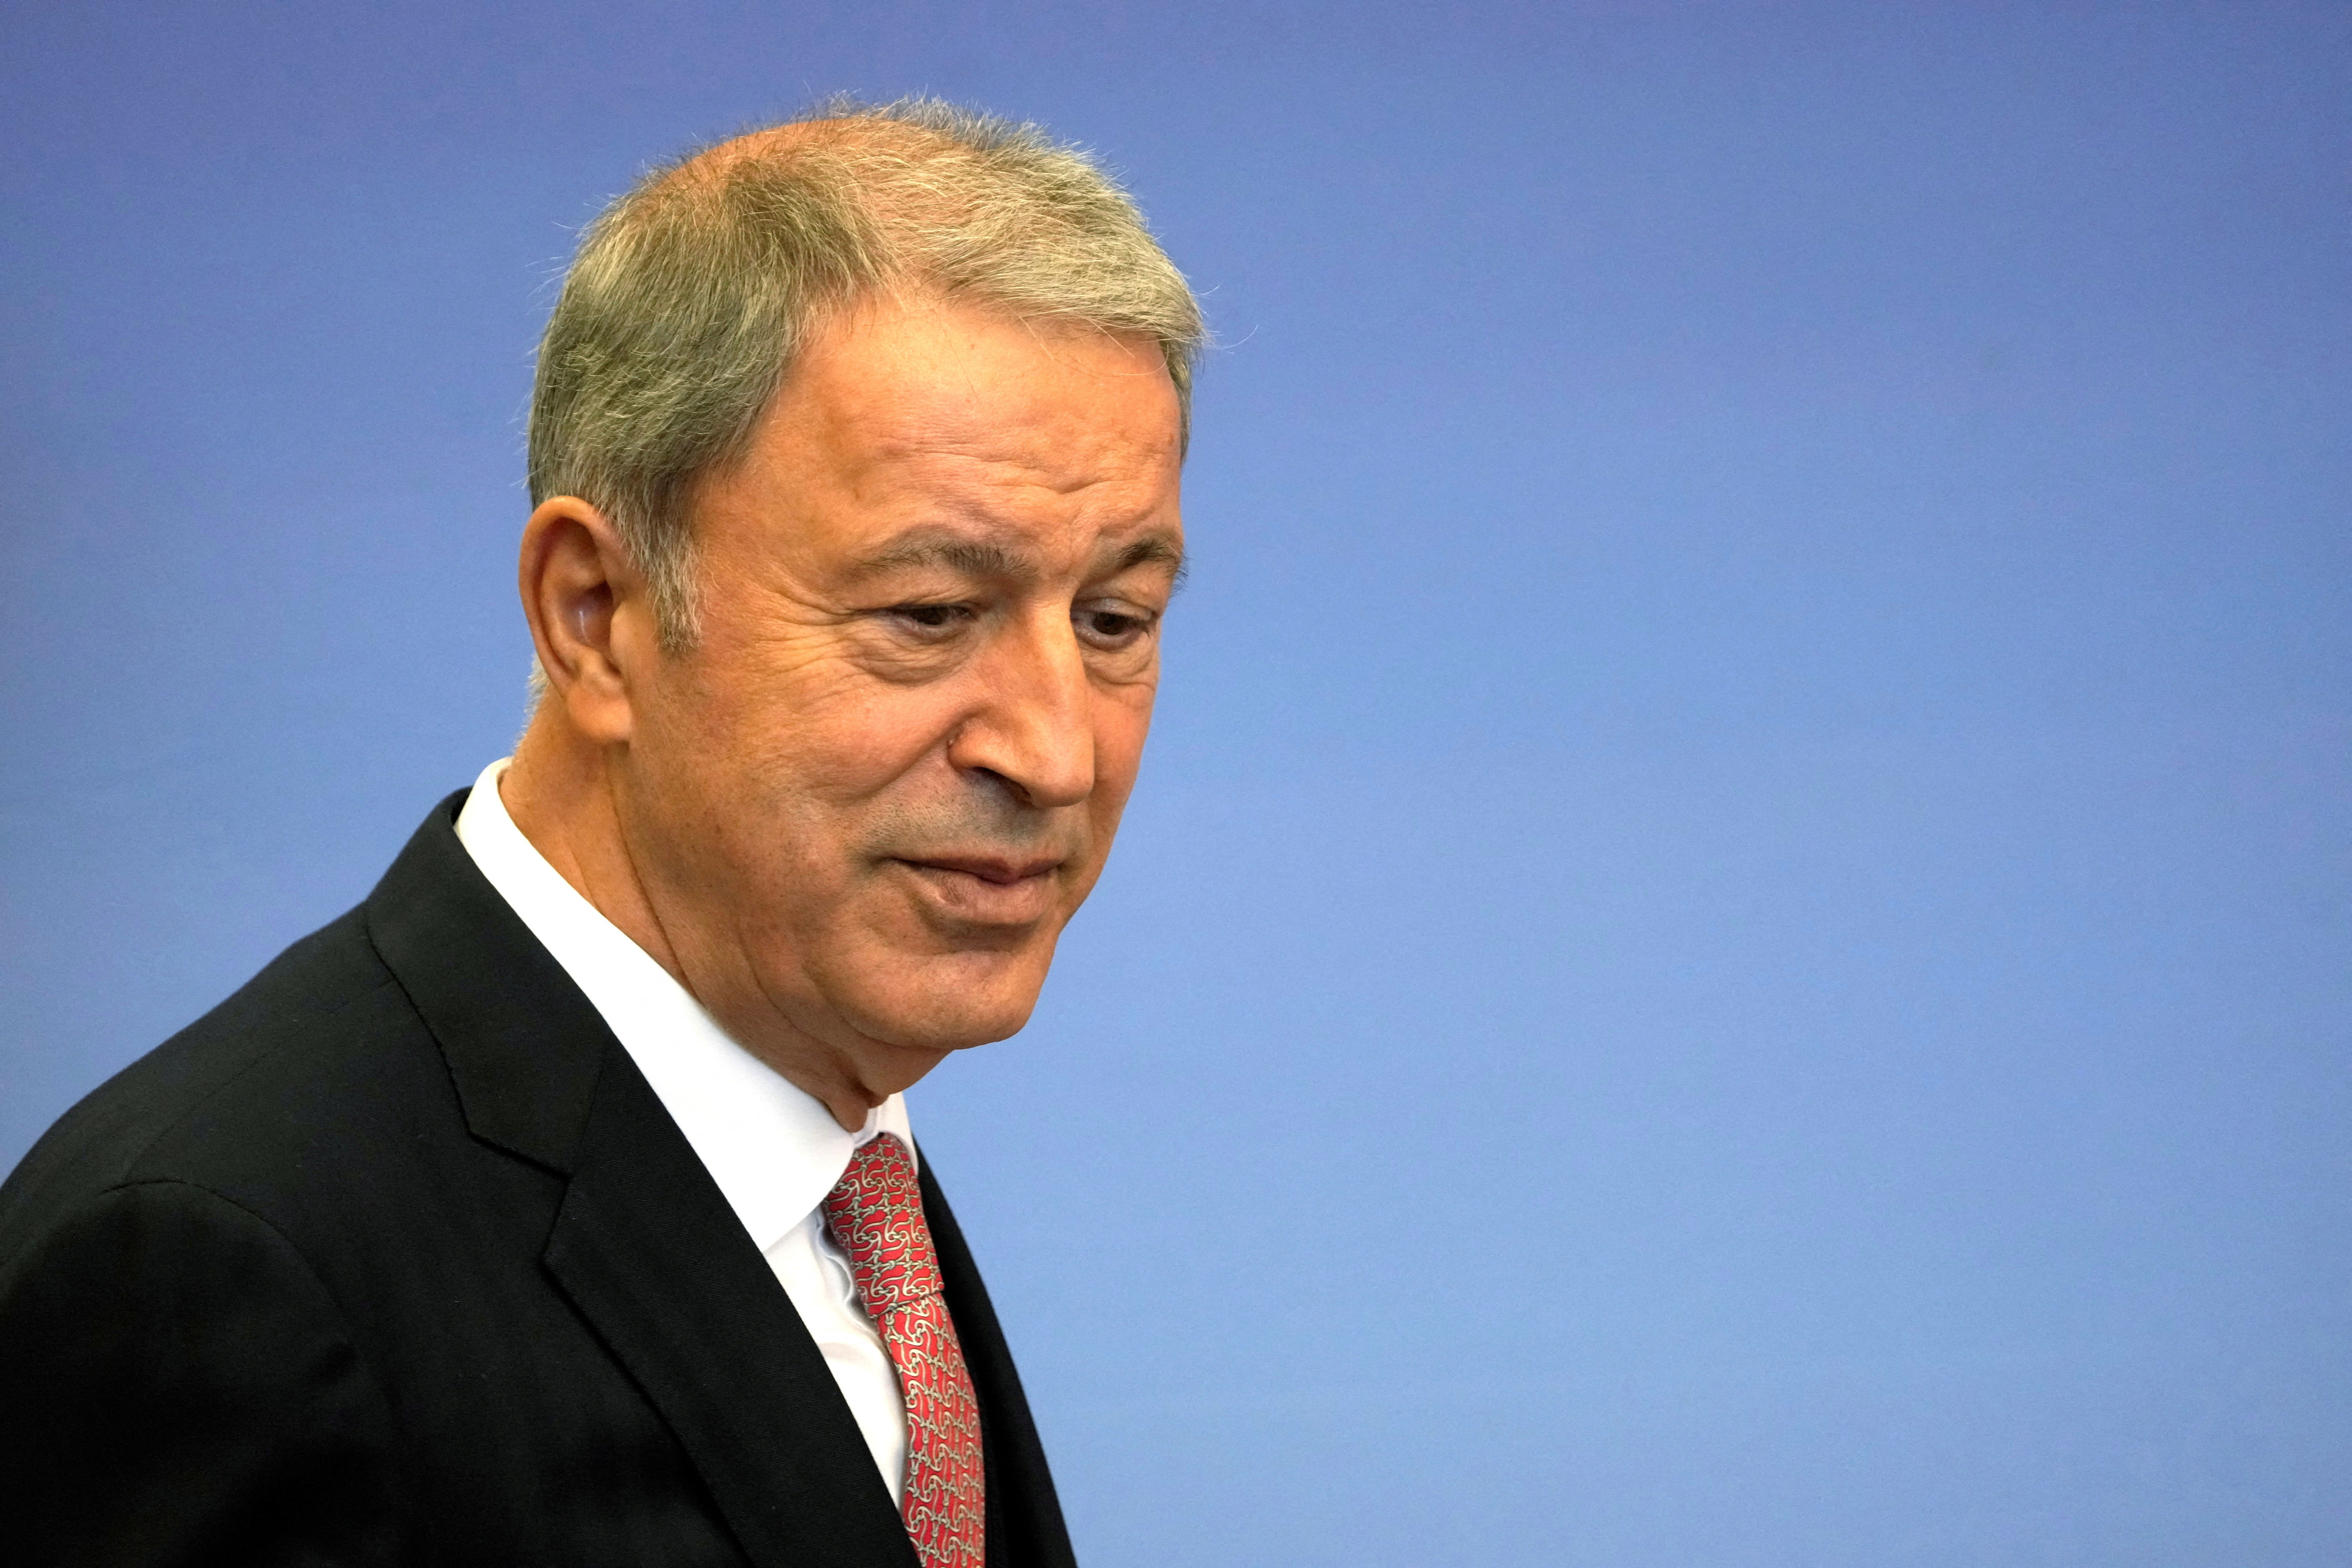 Turkish Defence Minister Akar attends a news conference in Riga